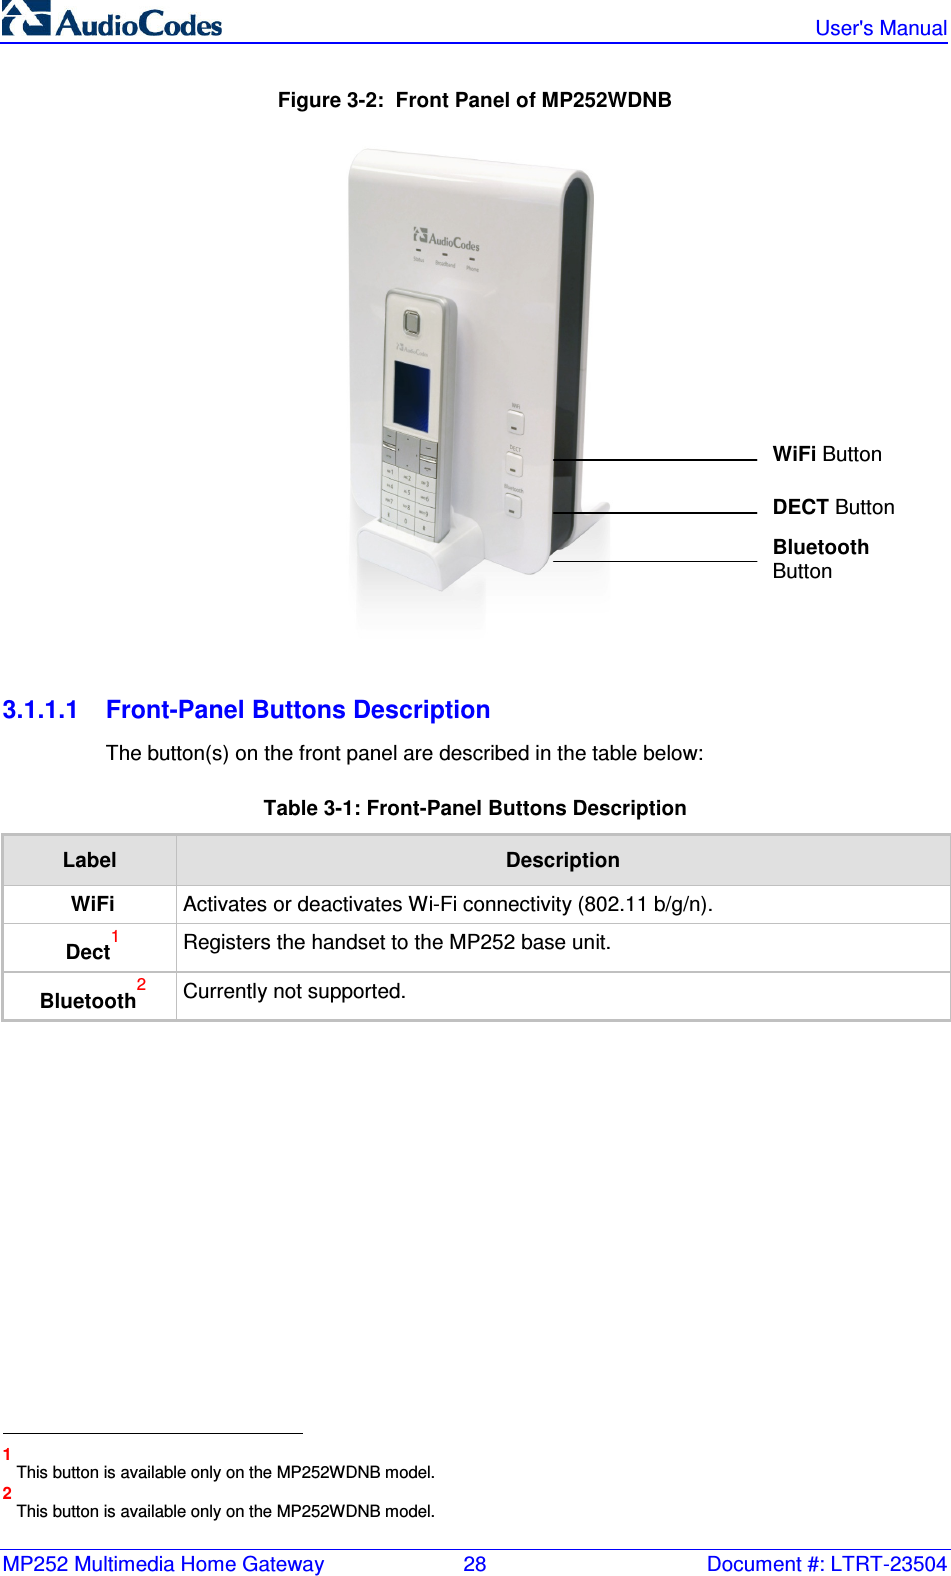 MP252 Multimedia Home Gateway  28  Document #: LTRT-23504   User&apos;s Manual Figure 3-2:  Front Panel of MP252WDNB  3.1.1.1  Front-Panel Buttons Description The button(s) on the front panel are described in the table below: Table 3-1: Front-Panel Buttons Description Label  Description WiFi  Activates or deactivates Wi-Fi connectivity (802.11 b/g/n).  Dect1 Registers the handset to the MP252 base unit. Bluetooth2 Currently not supported.                                                        1 This button is available only on the MP252WDNB model. 2 This button is available only on the MP252WDNB model. WiFi Button DECT Button Bluetooth Button 